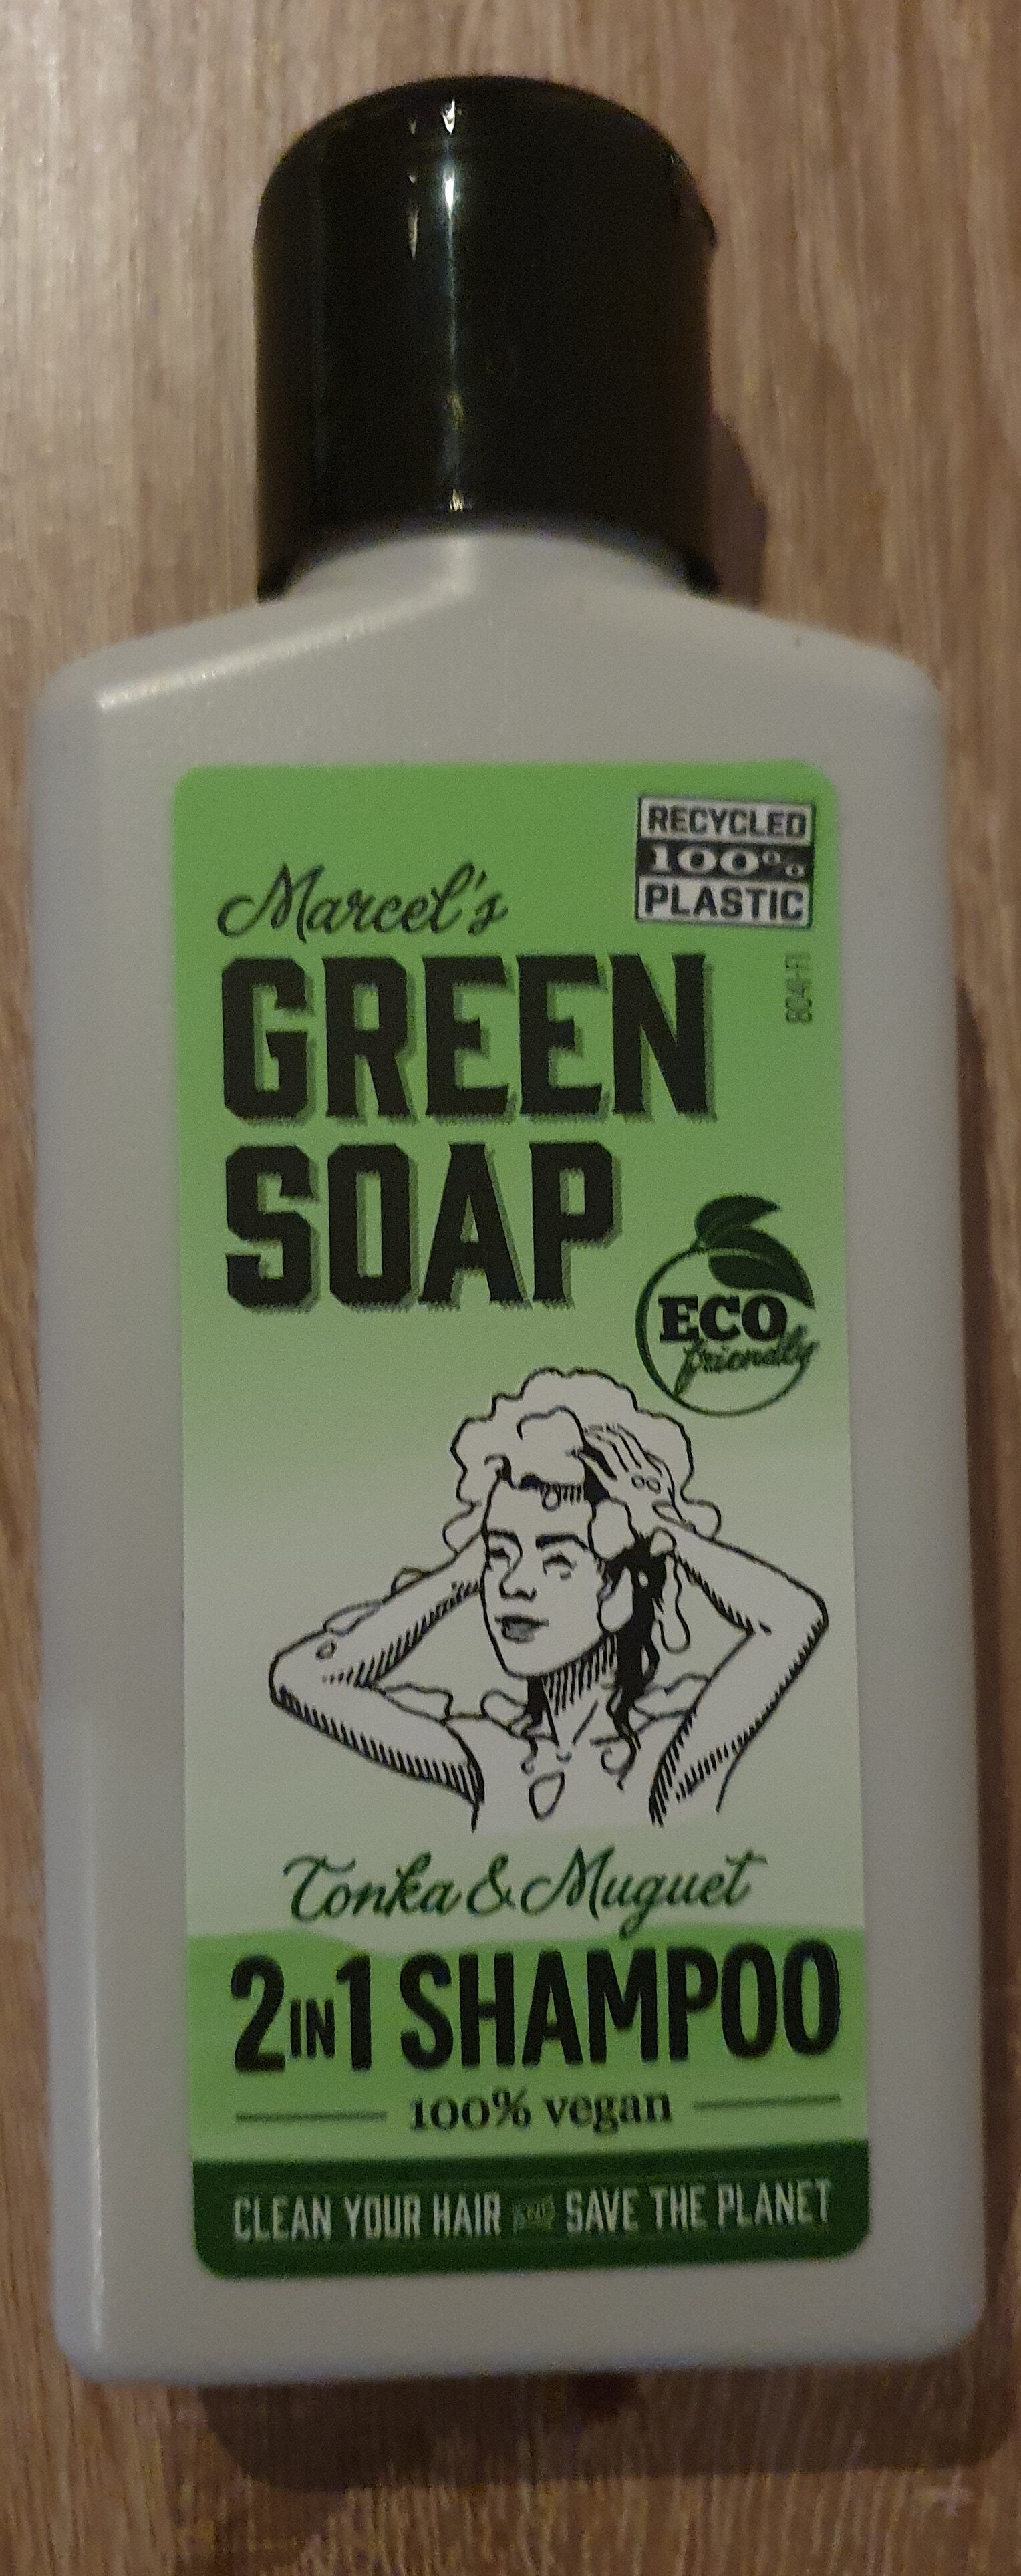 Green soap 2 in 1 shampoo - Product - nl